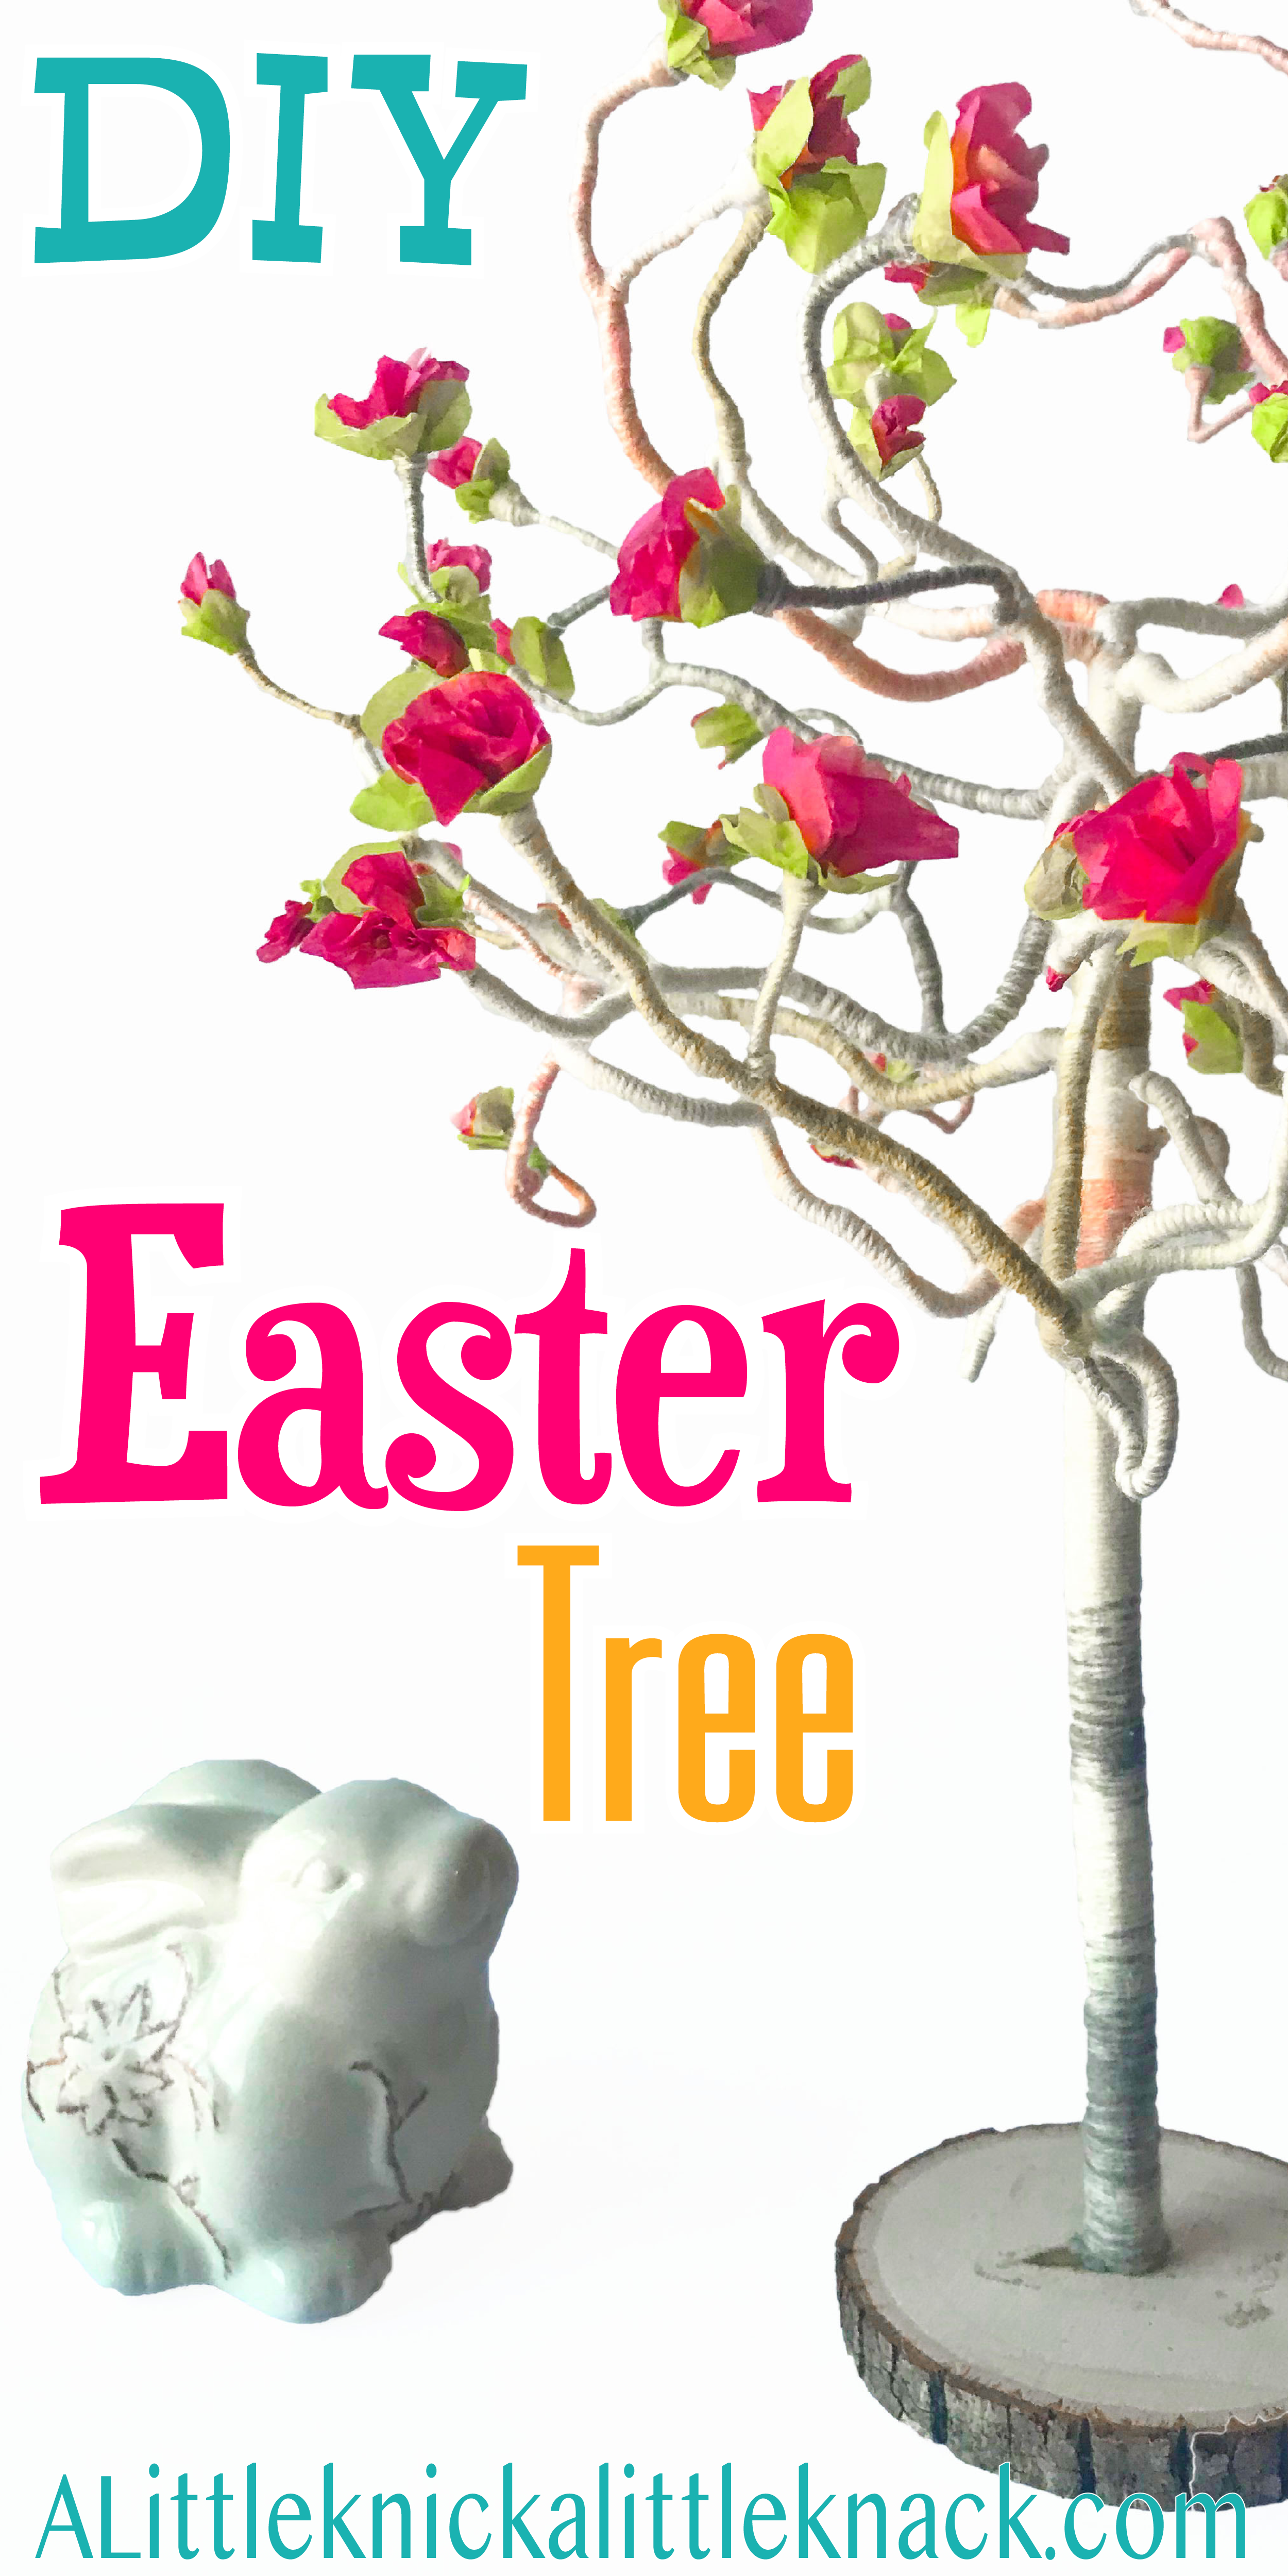 String wrapped Easter Tree with pink flowers next to a ceramic floral bunny with text overlay 